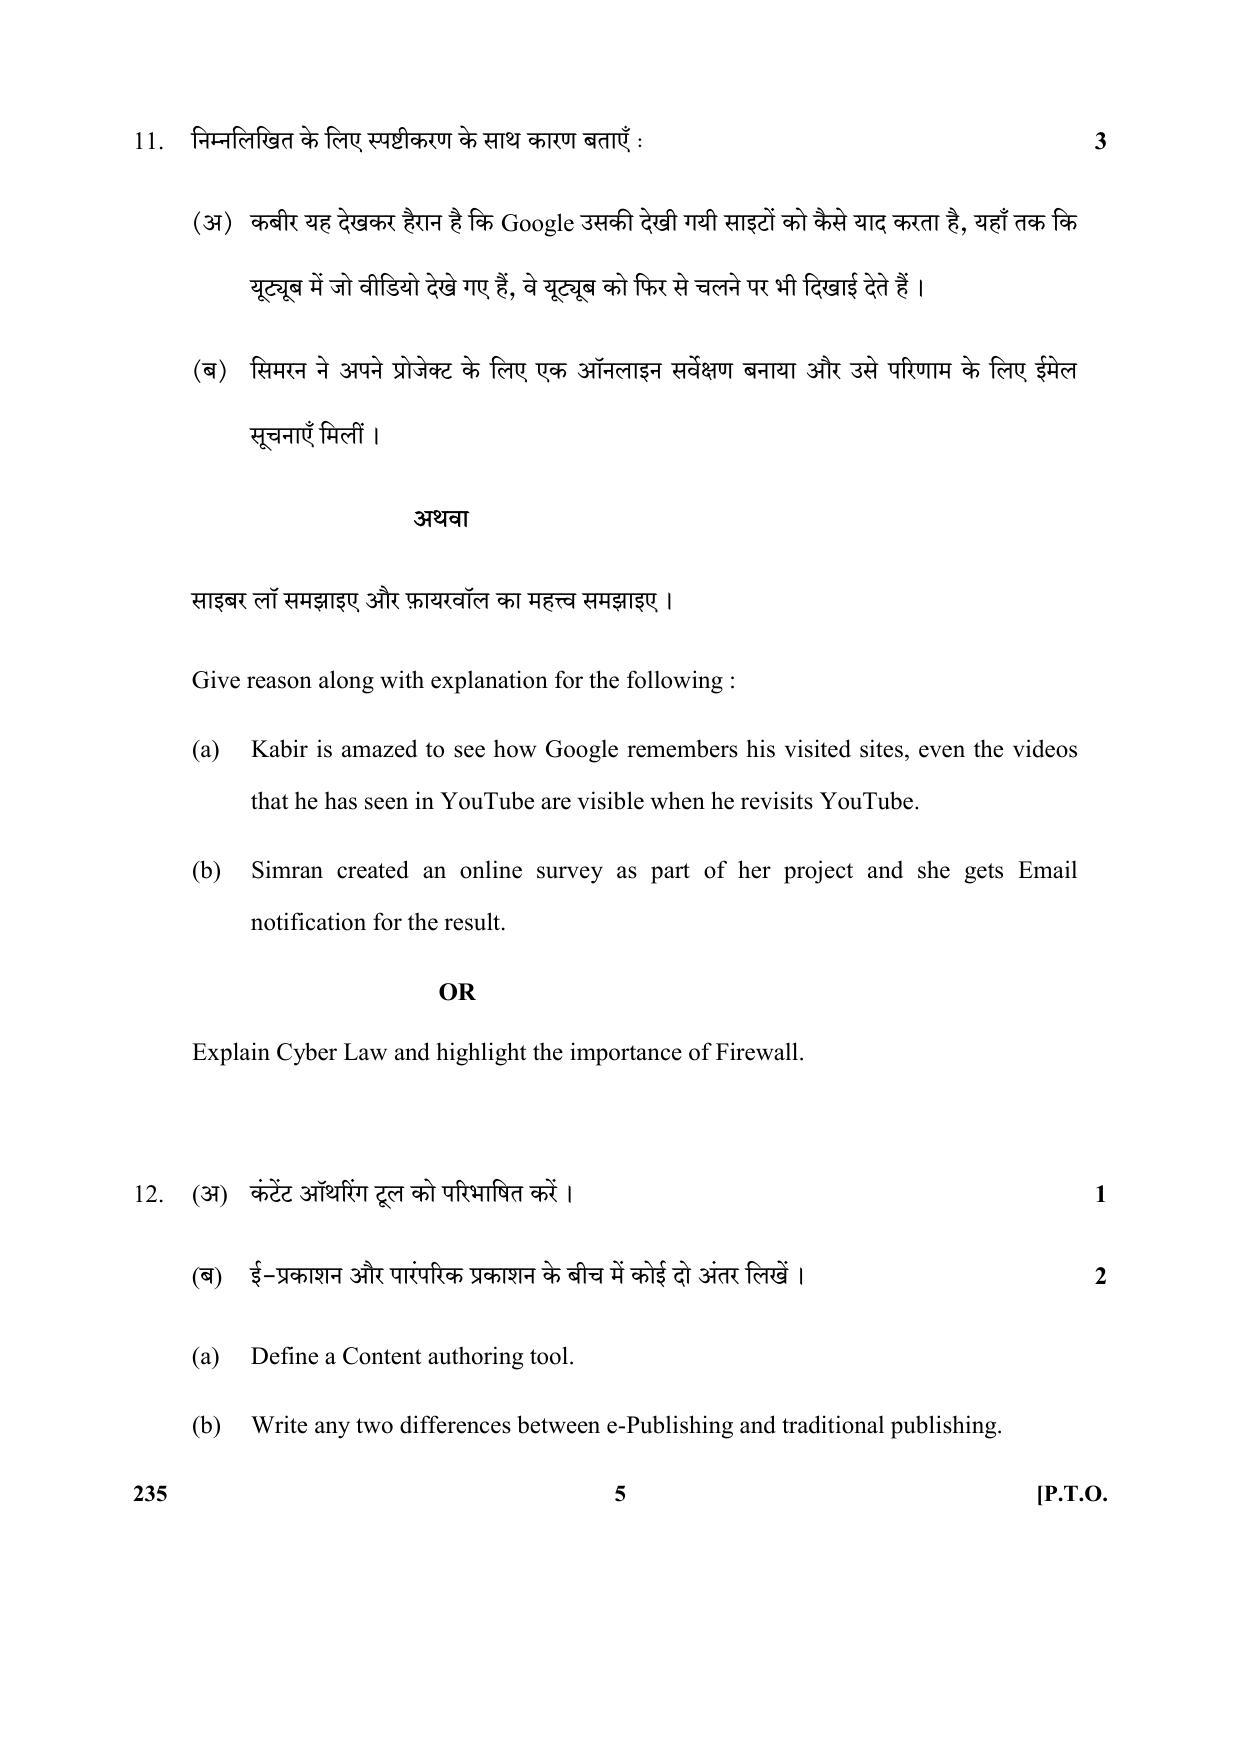 CBSE Class 10 235 Elements of Bookkeeping & Accountancy (Commerce) 2018 Question Paper - Page 5